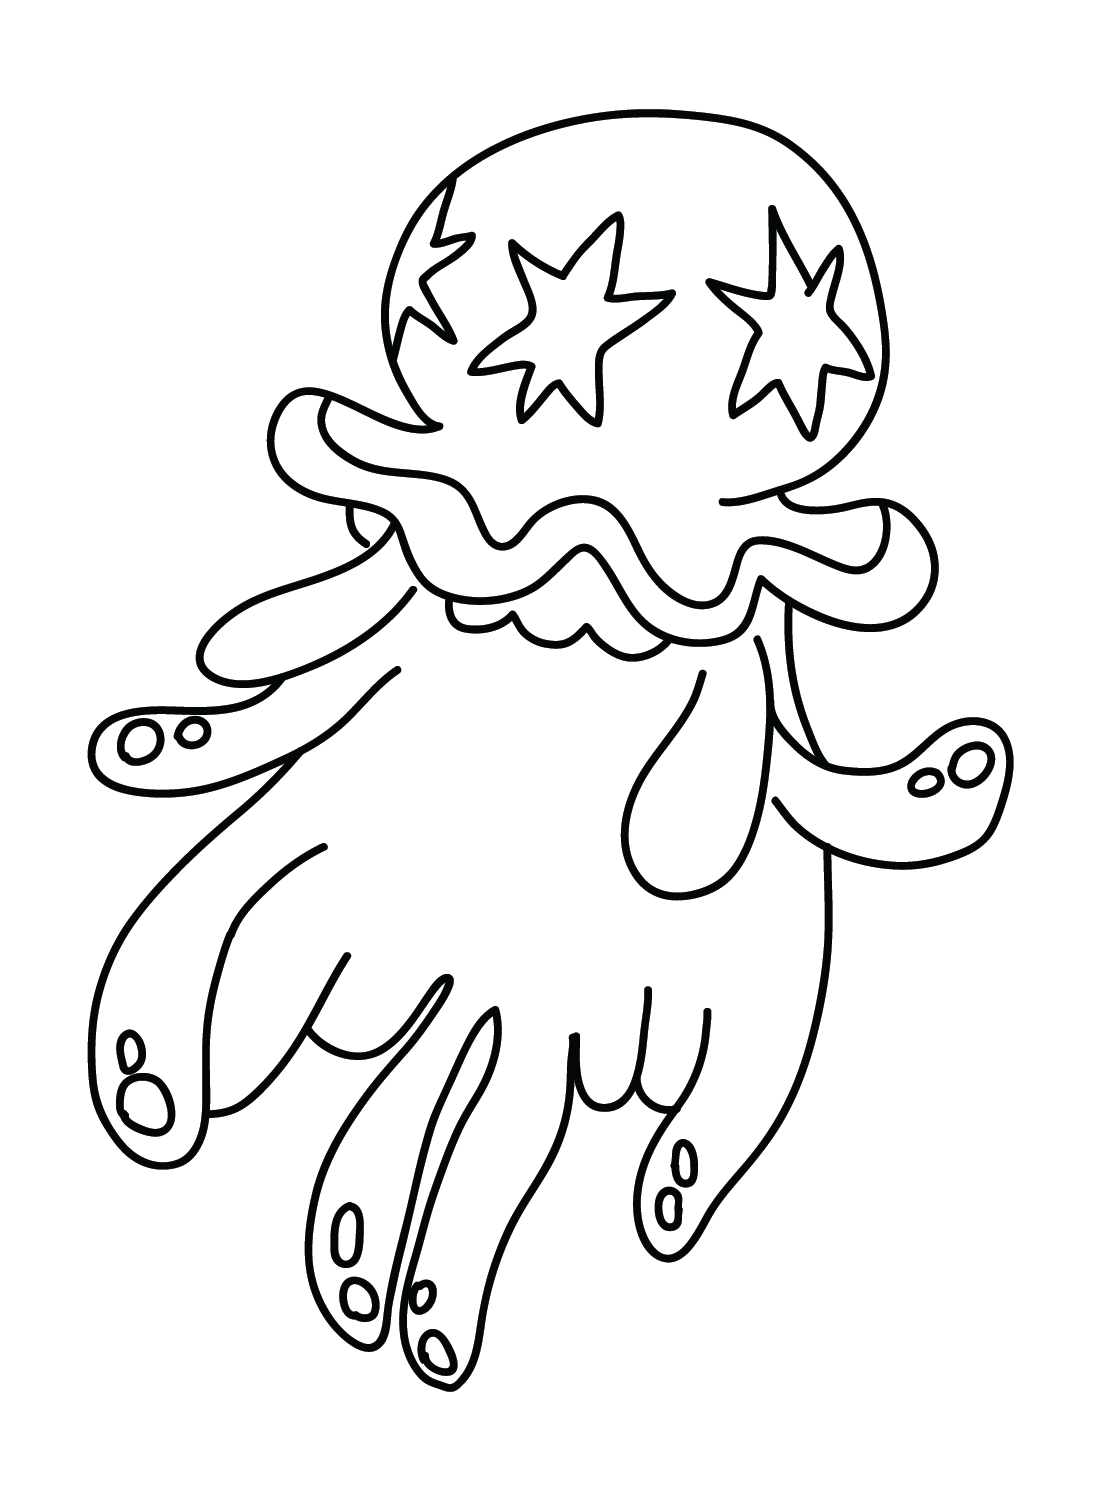 The Nihilego Coloring Page